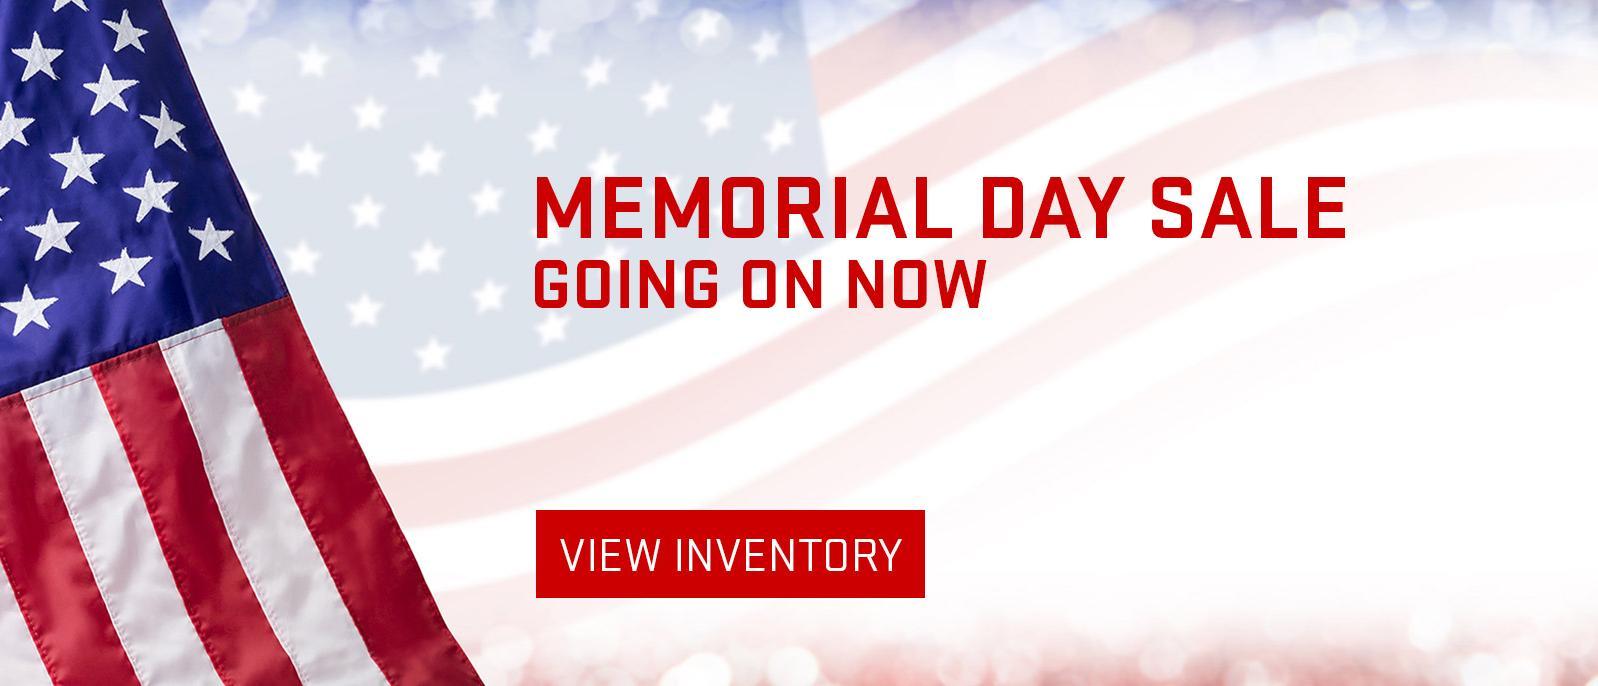 Memorial Day Auto Sale in Pittsburgh